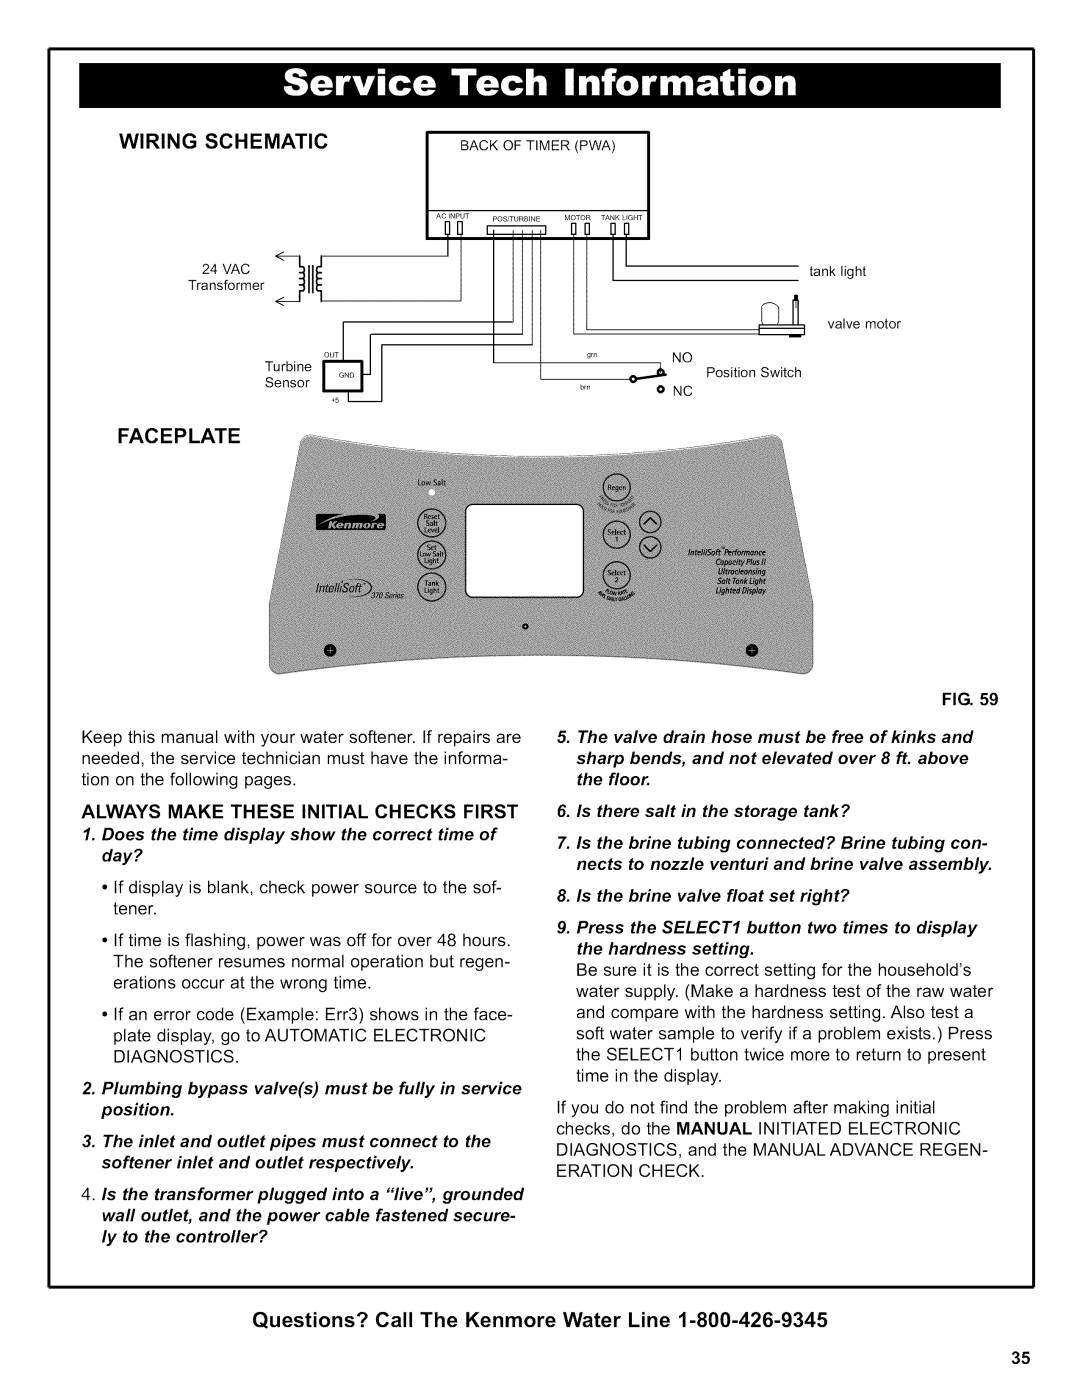 Kenmore 625.38376 owner manual Faceplate, Questions? Call The Kenmore Water Line, Wiring Schematic 